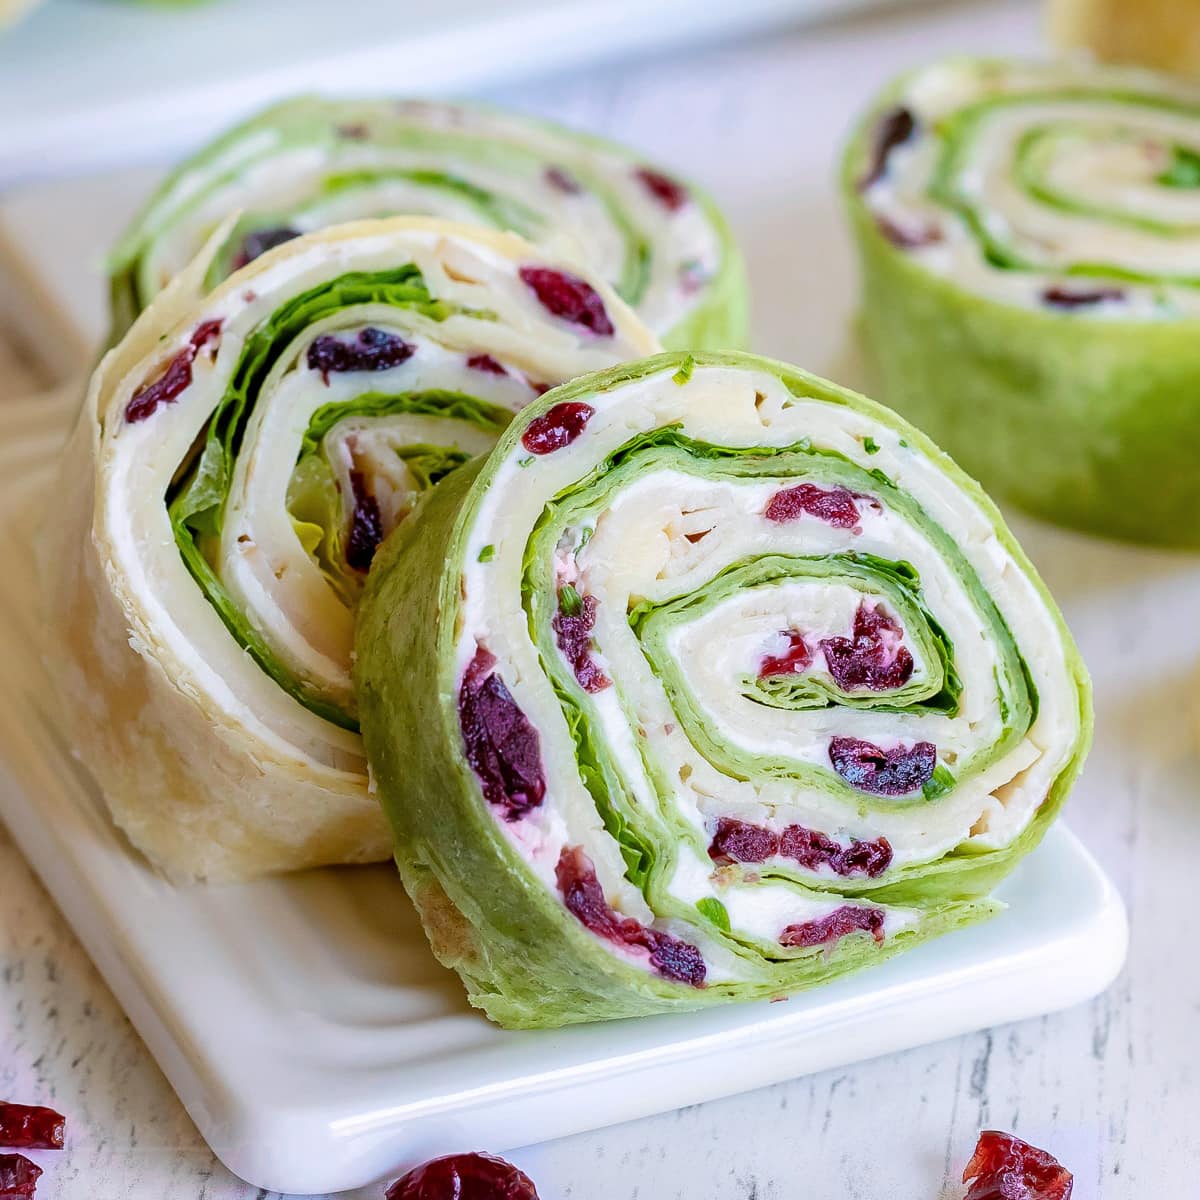 https://www.momontimeout.com/wp-content/uploads/2020/06/turkey-pinwheels-recipe-with-dried-cranberries-on-small-white-cutting-board-squared.jpg